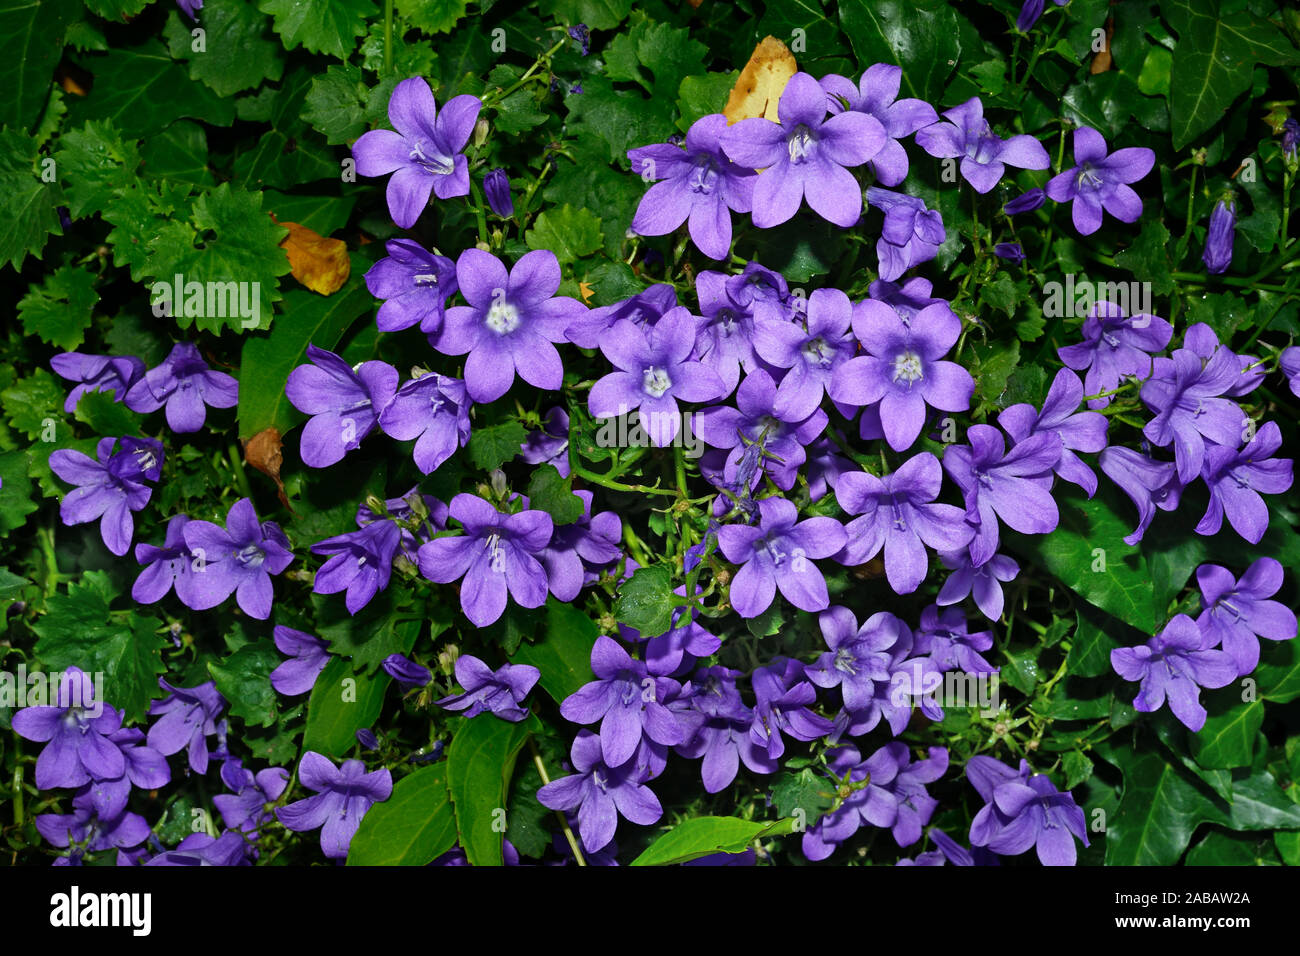 Campanula portenschlagiana (Dalmatian bellflower) is native to the Dalmatian Mountains of Croatia where it grows on cliffs. Stock Photo